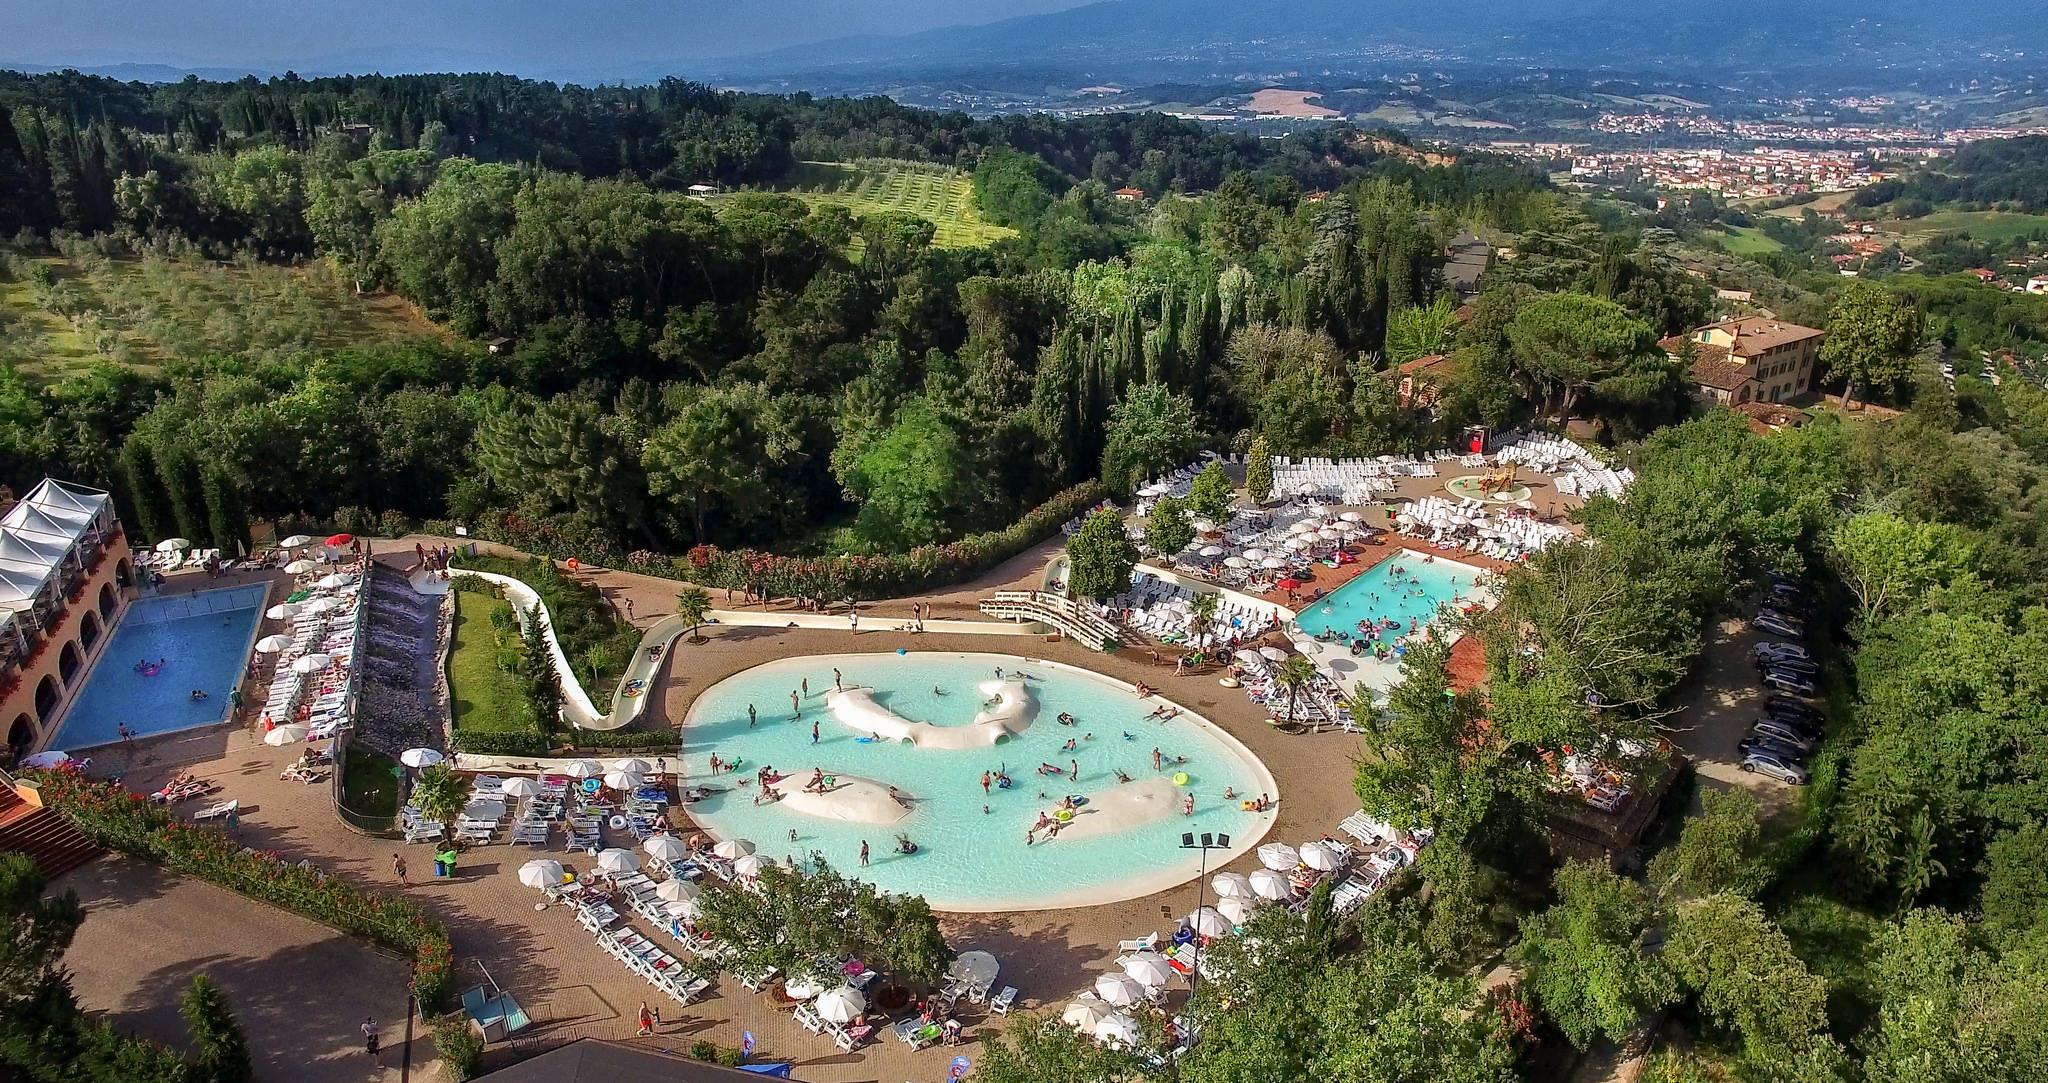 Luxurious camping holidays: hu, the Italian camping network – image 1